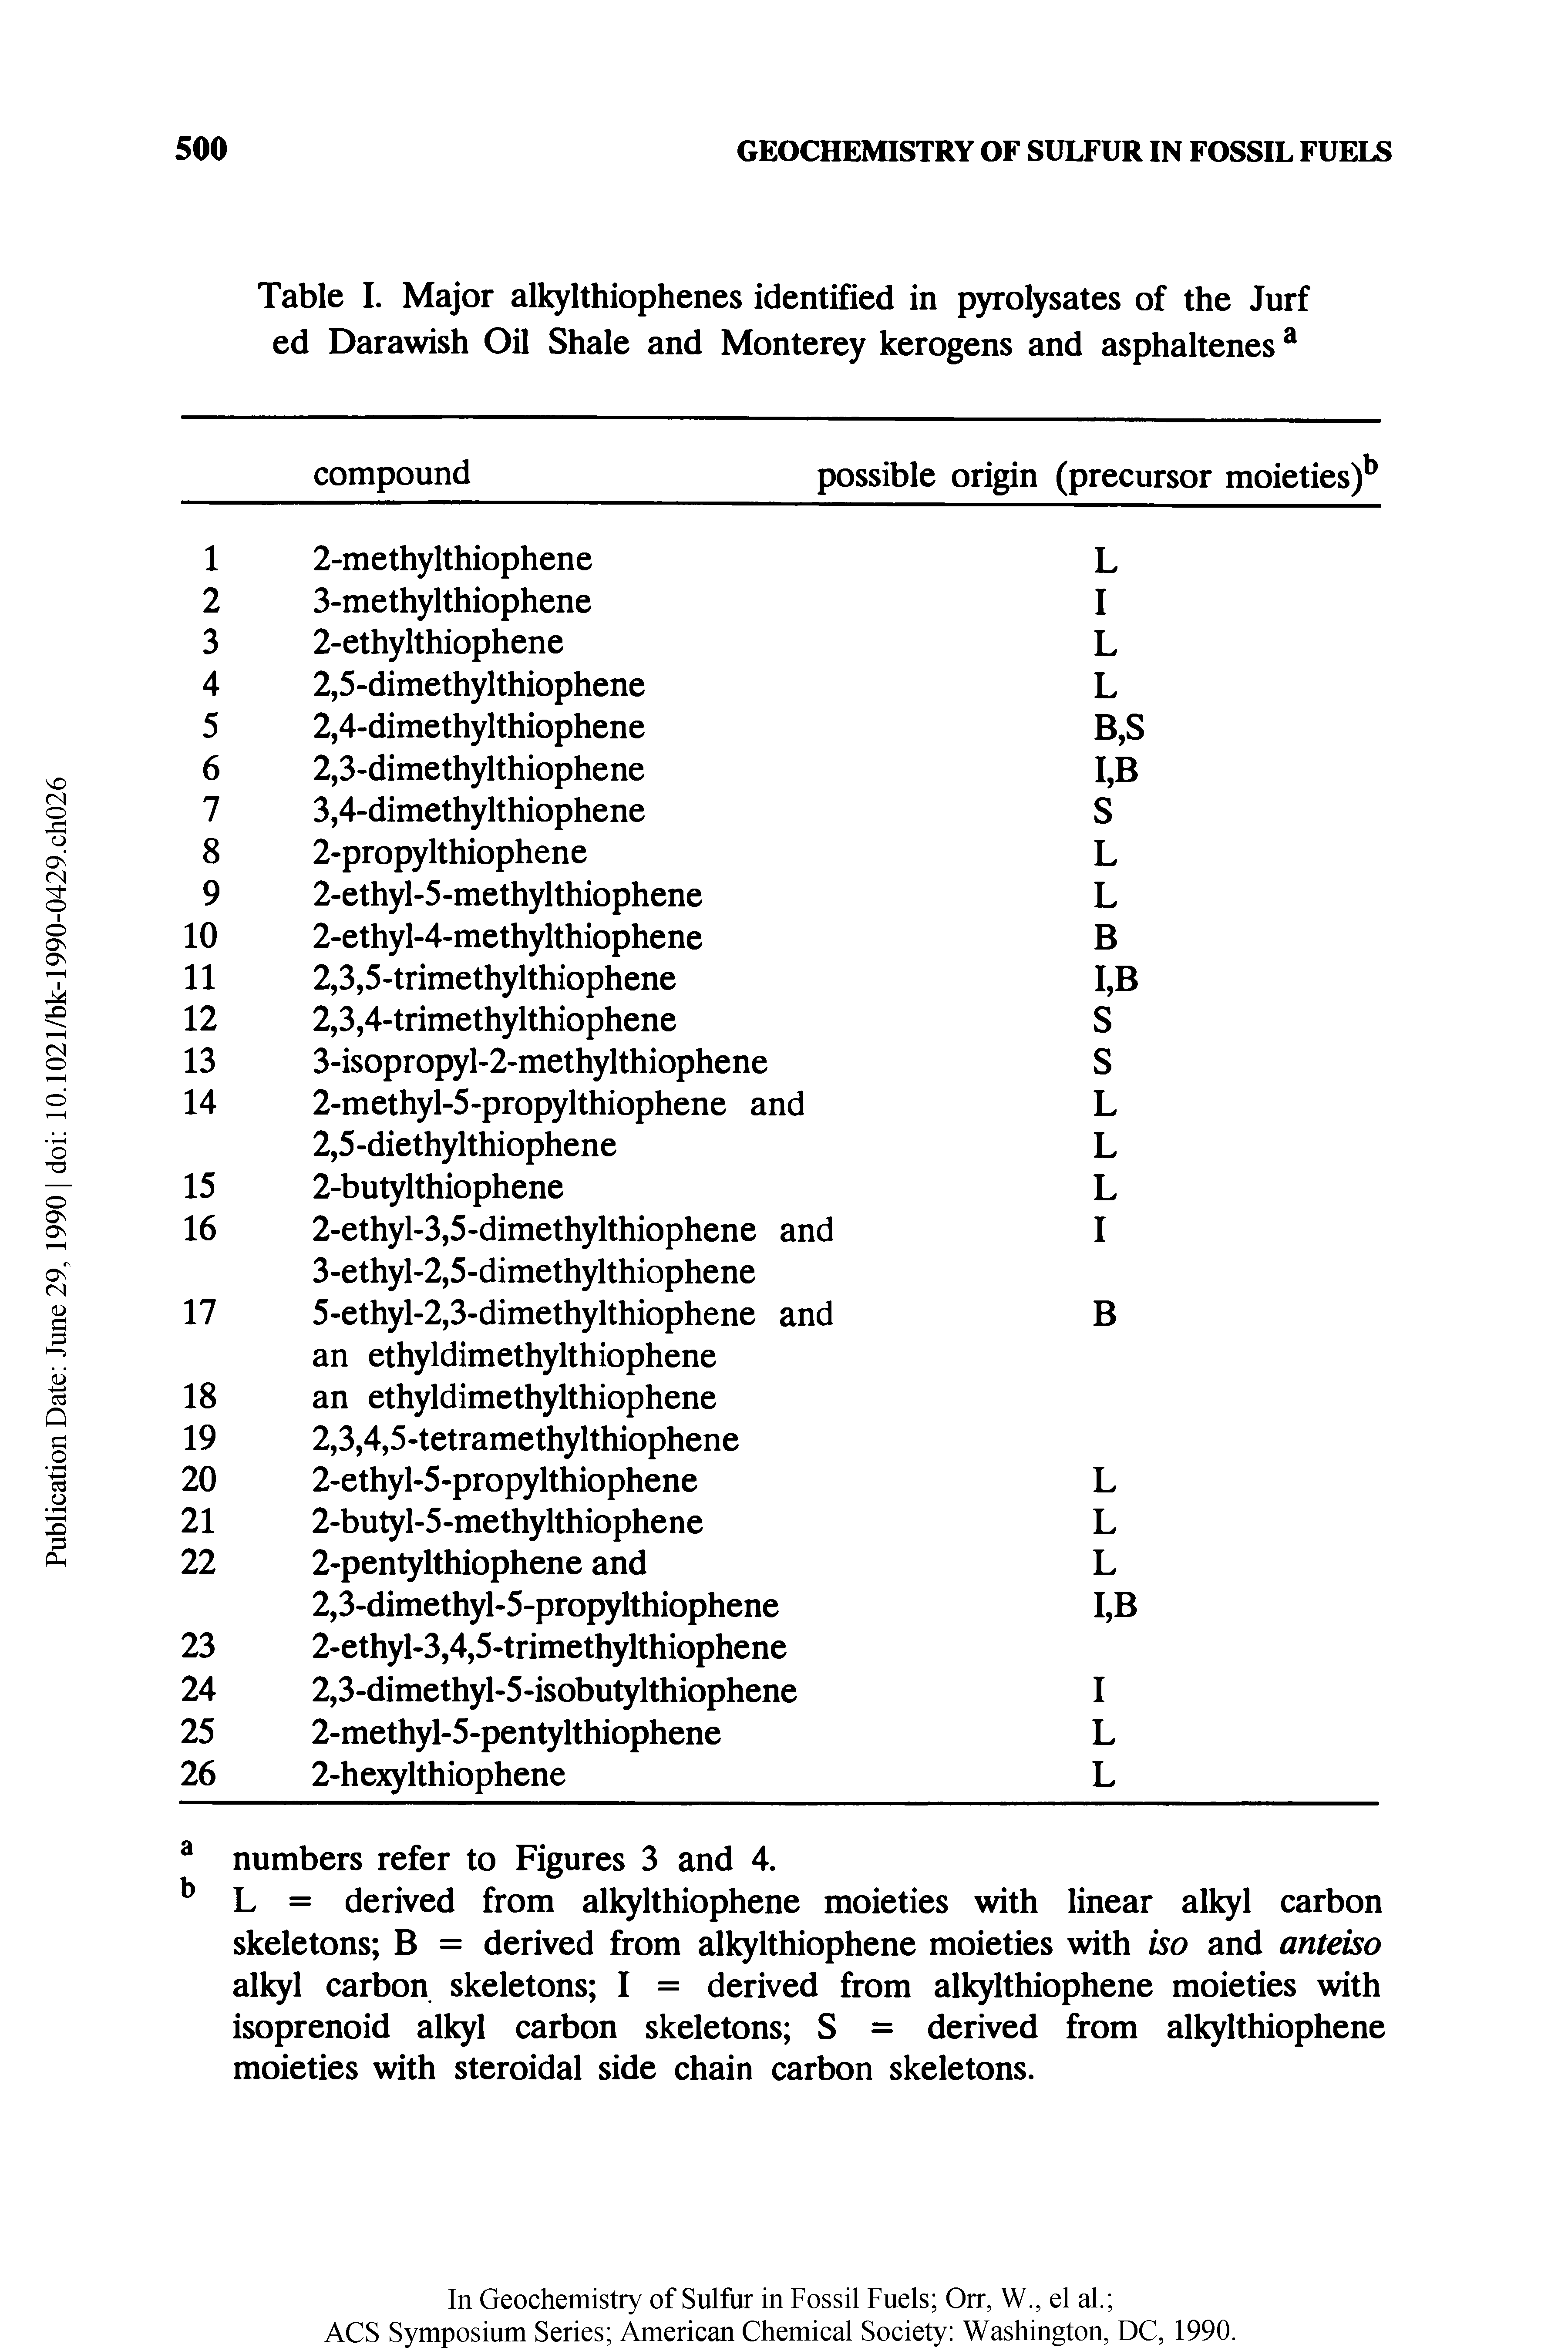 Table I. Major alkylthiophenes identified in pyrolysates of the Jurf ed Darawish Oil Shale and Monterey kerogens and asphaltenesa...